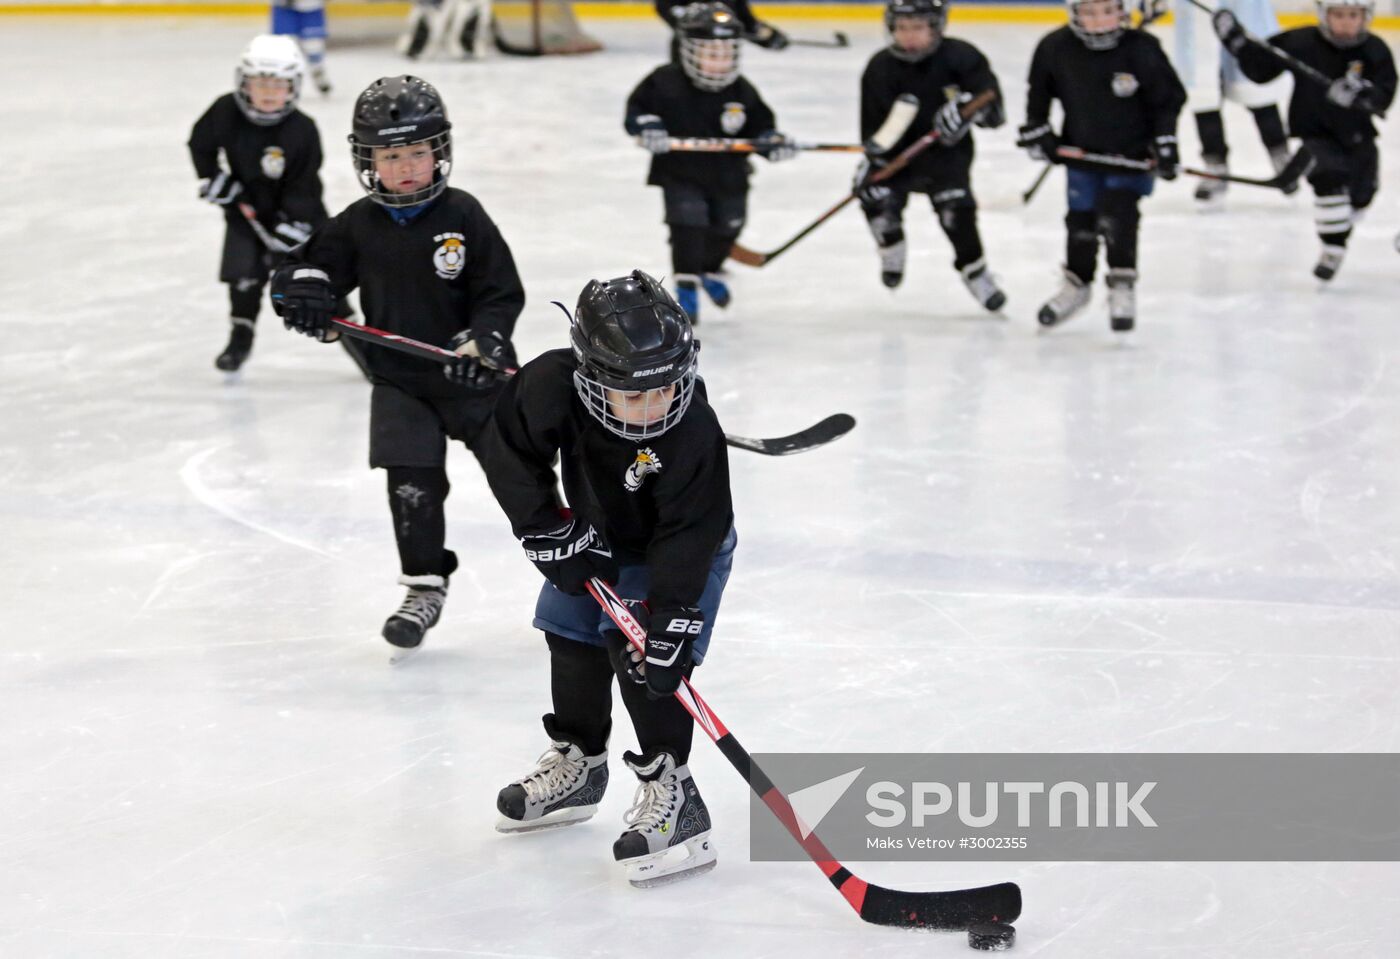 South Penguins face off Father Frost team in an ice hockey game